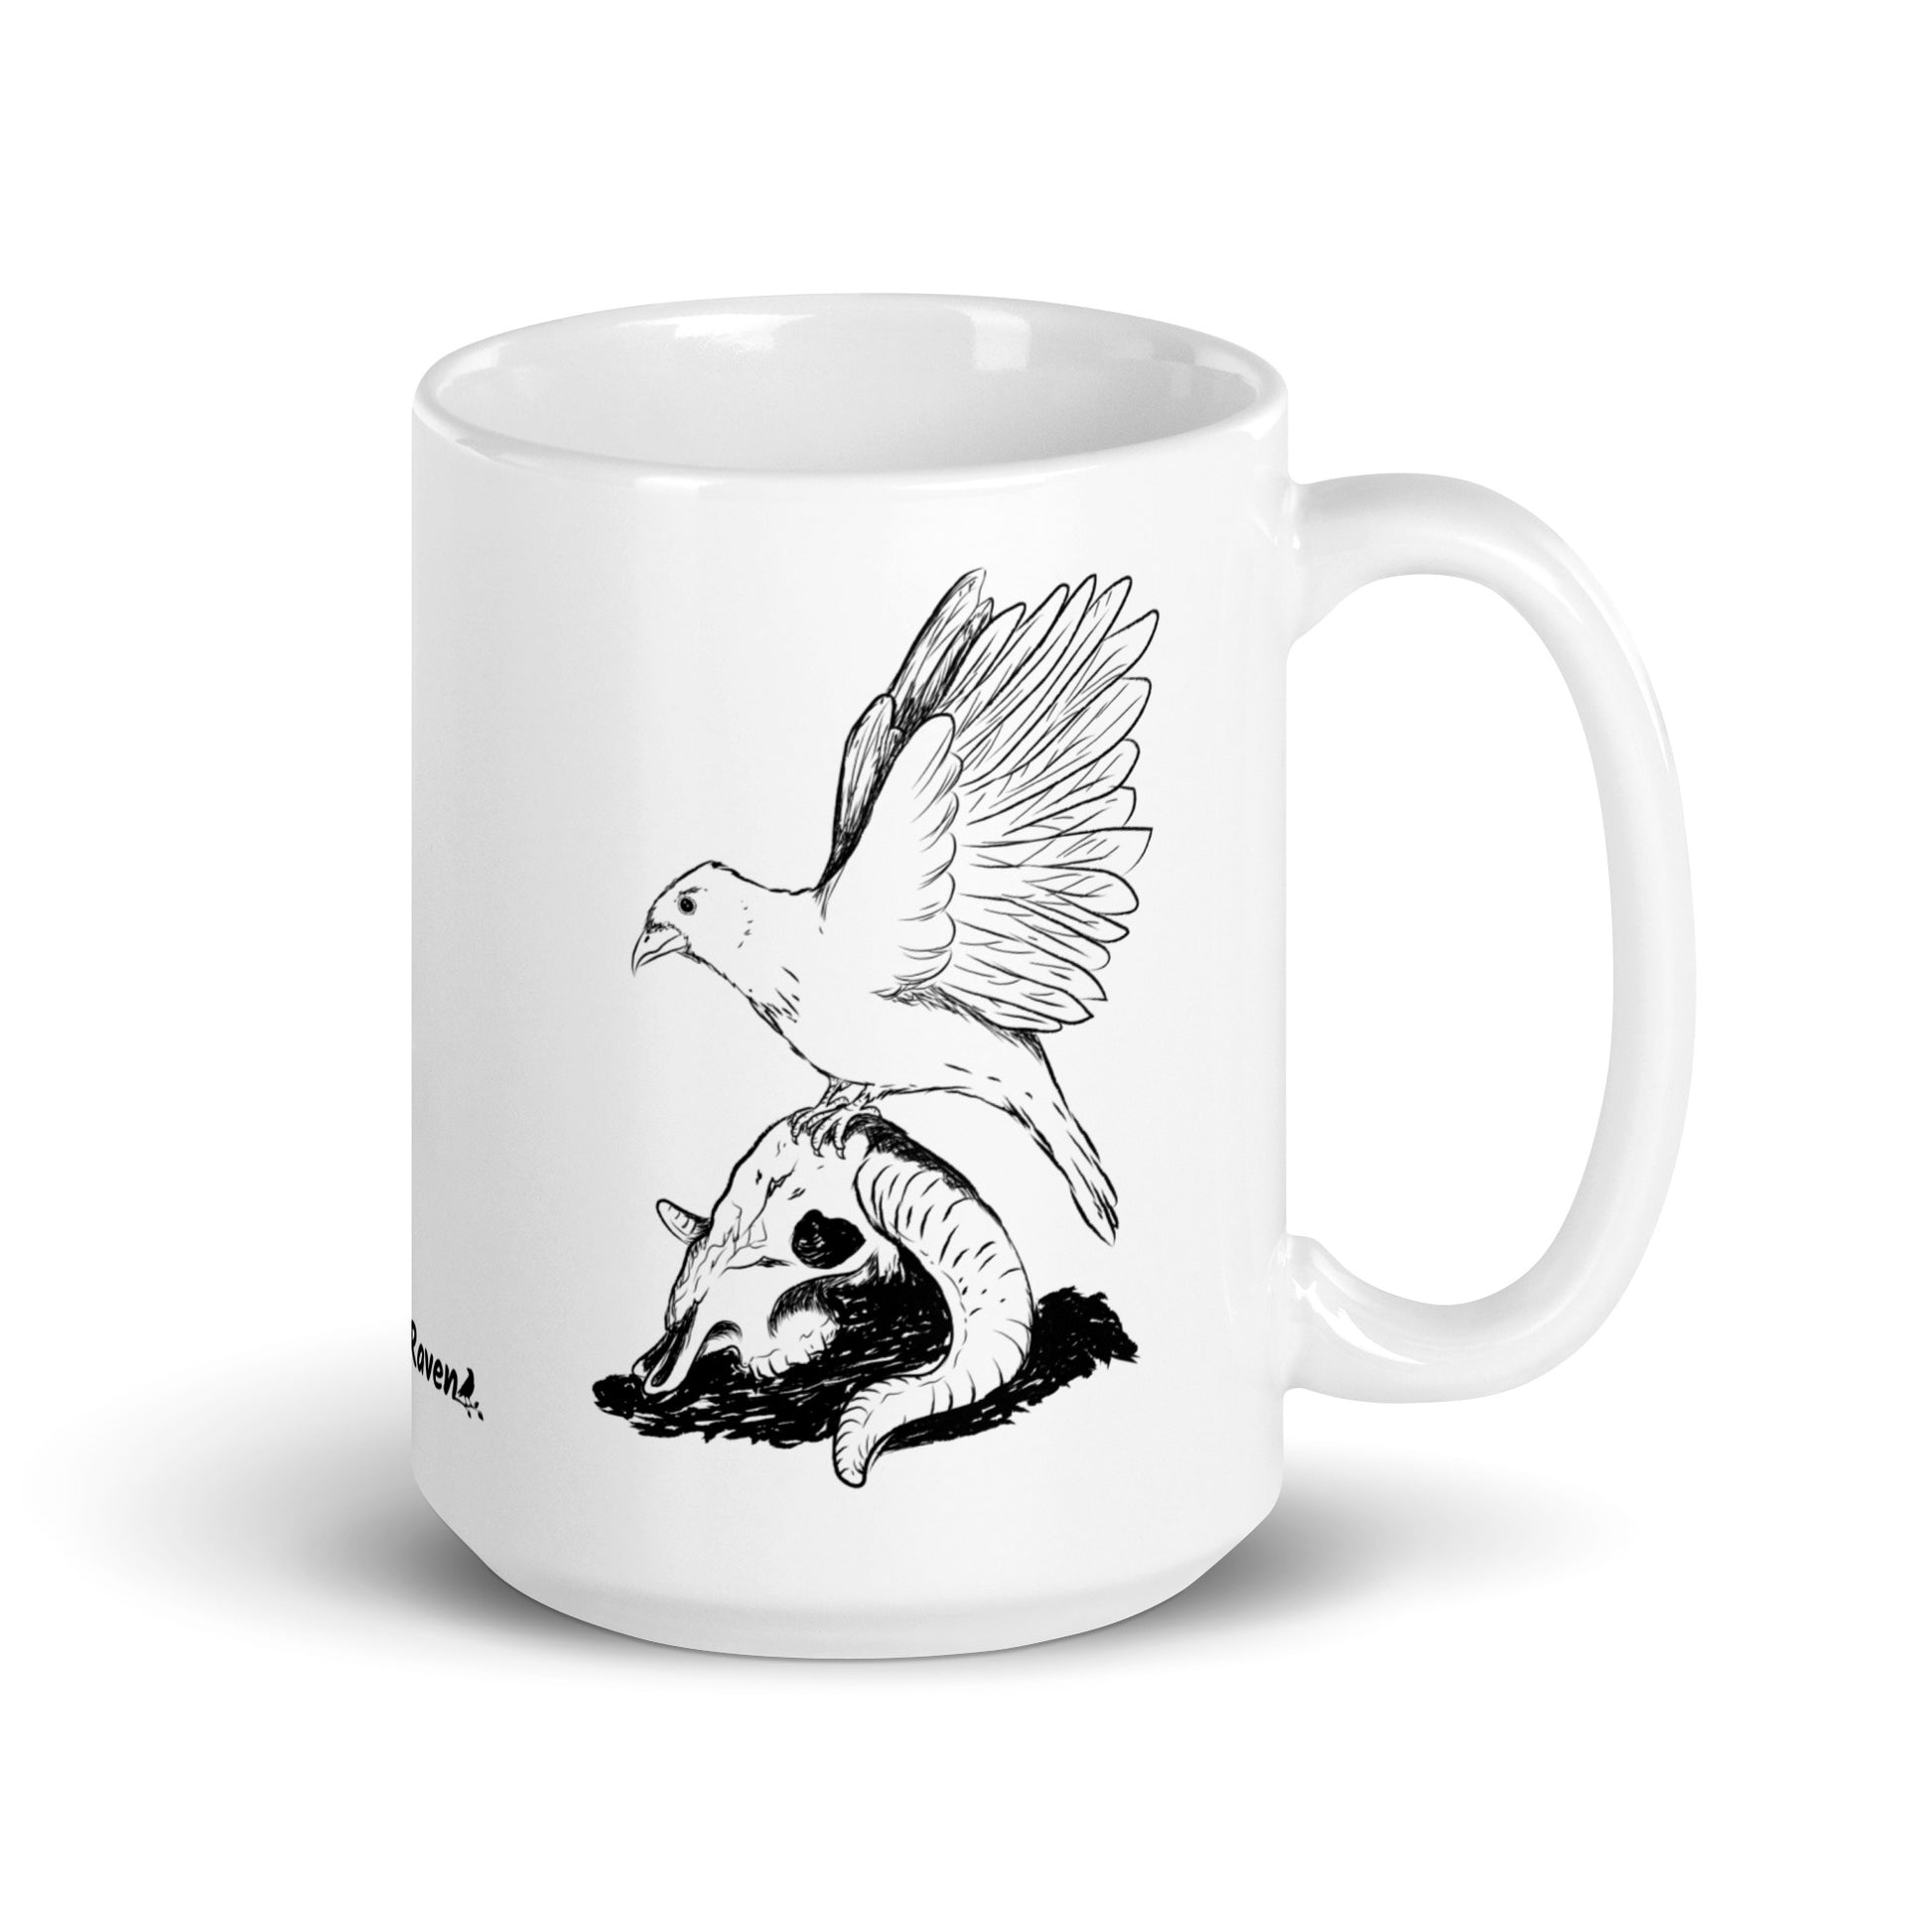 15 ounce white glossy mug featuring double sided print of Reflections, a design with a crow with wings outstretched on a sheep skull.